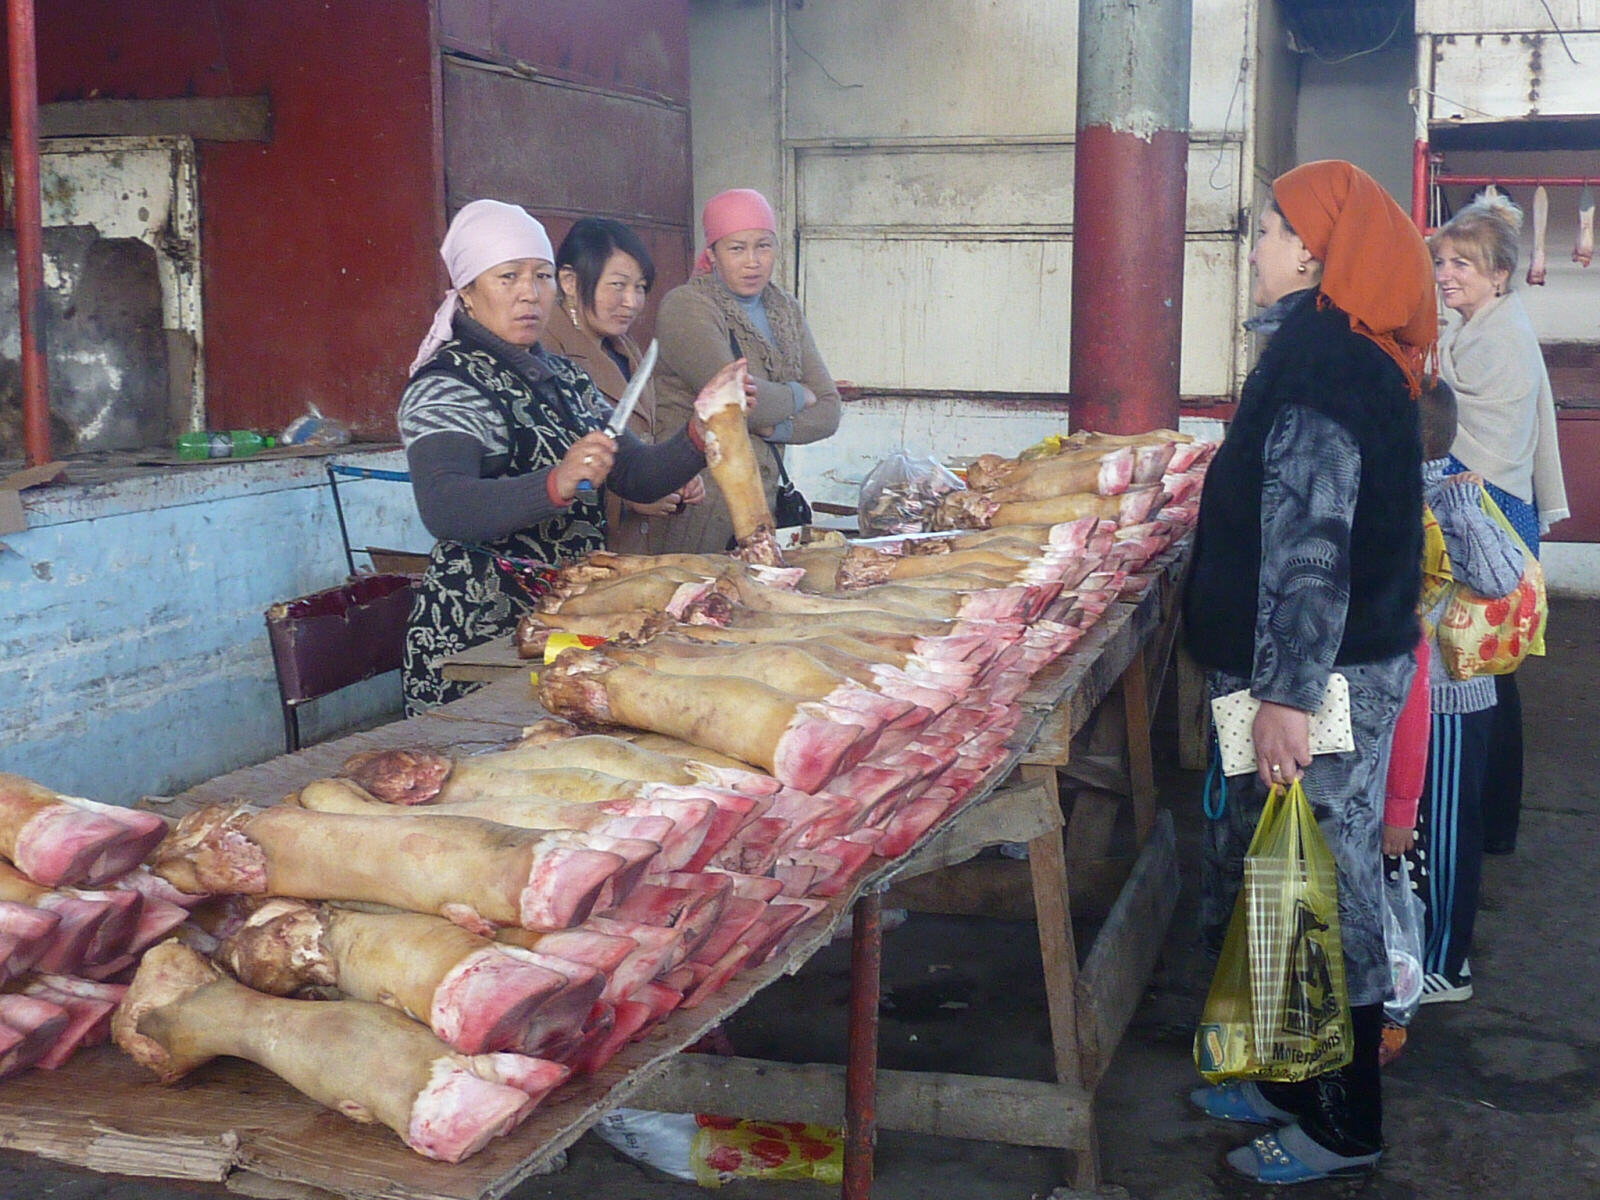 Cows' feet in the market in Osh, Kyrgyzstan